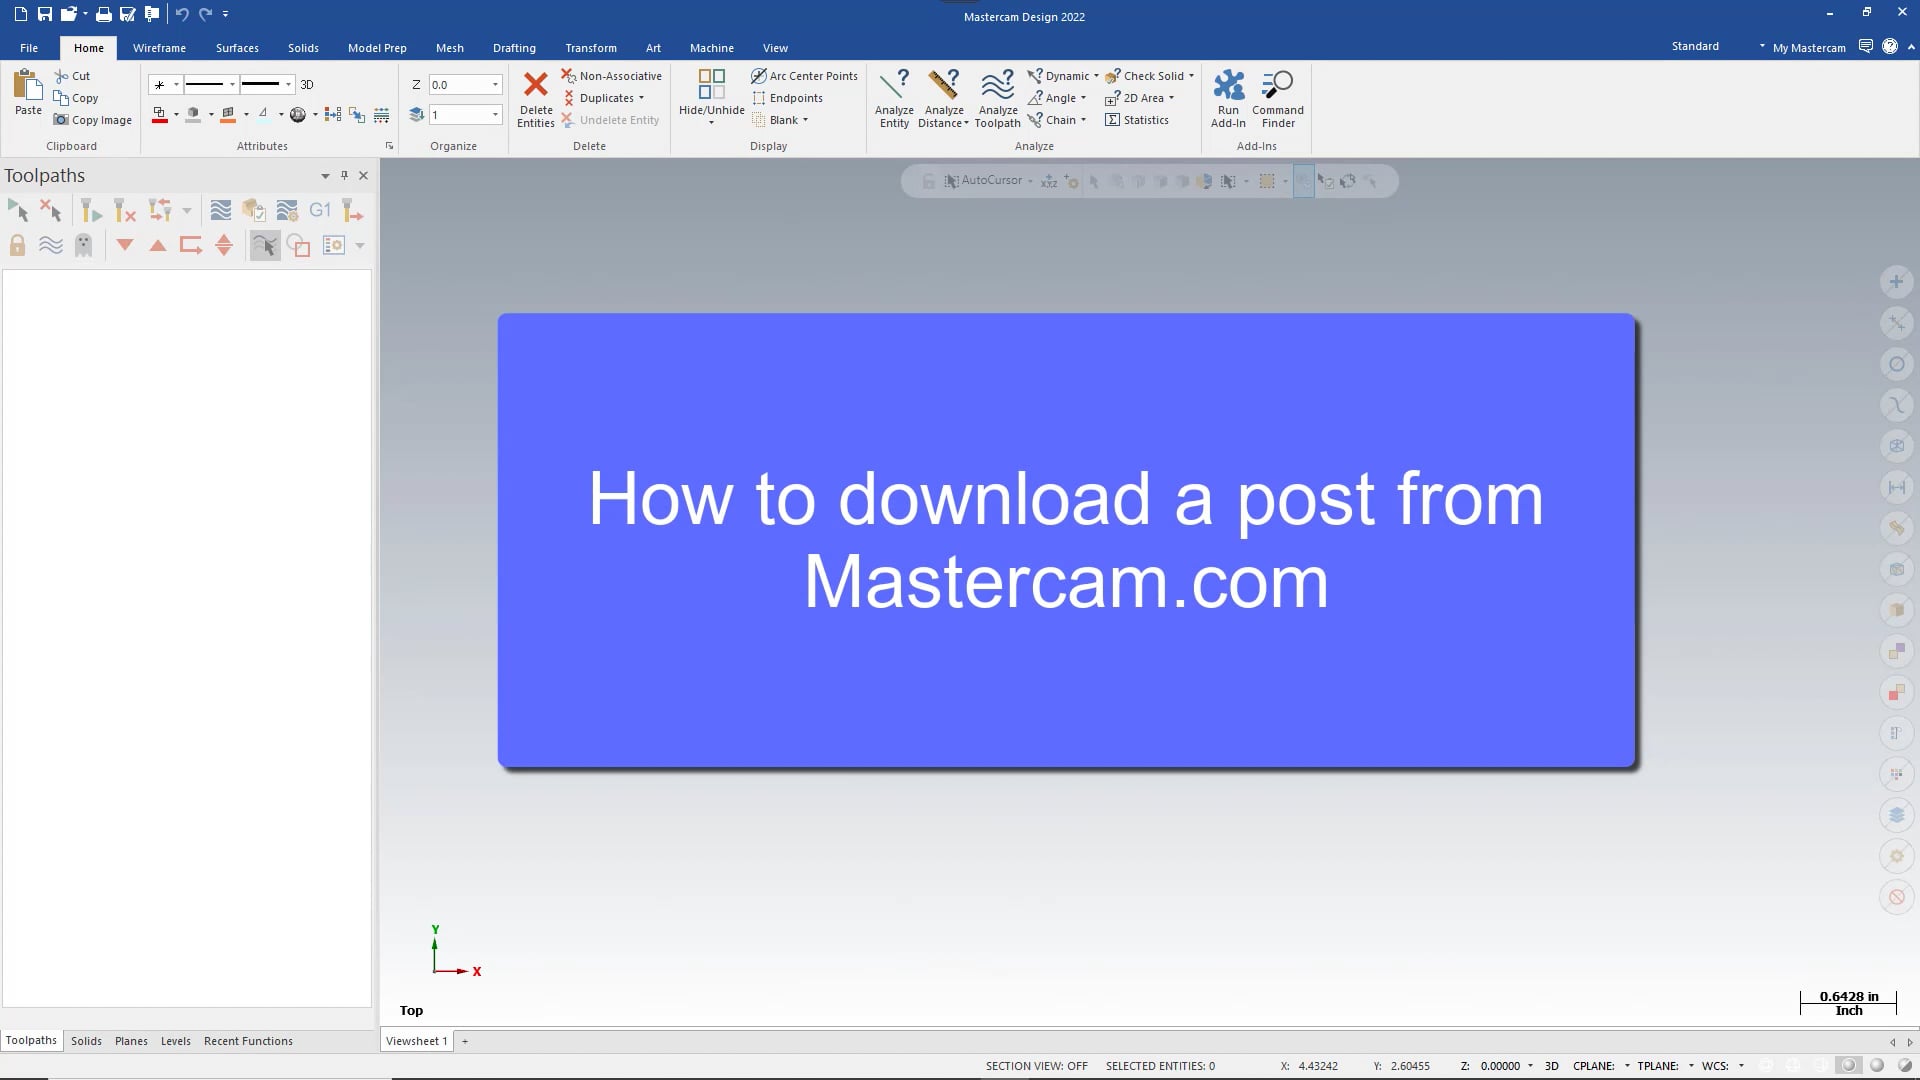 How to download a post from Mastercam.com